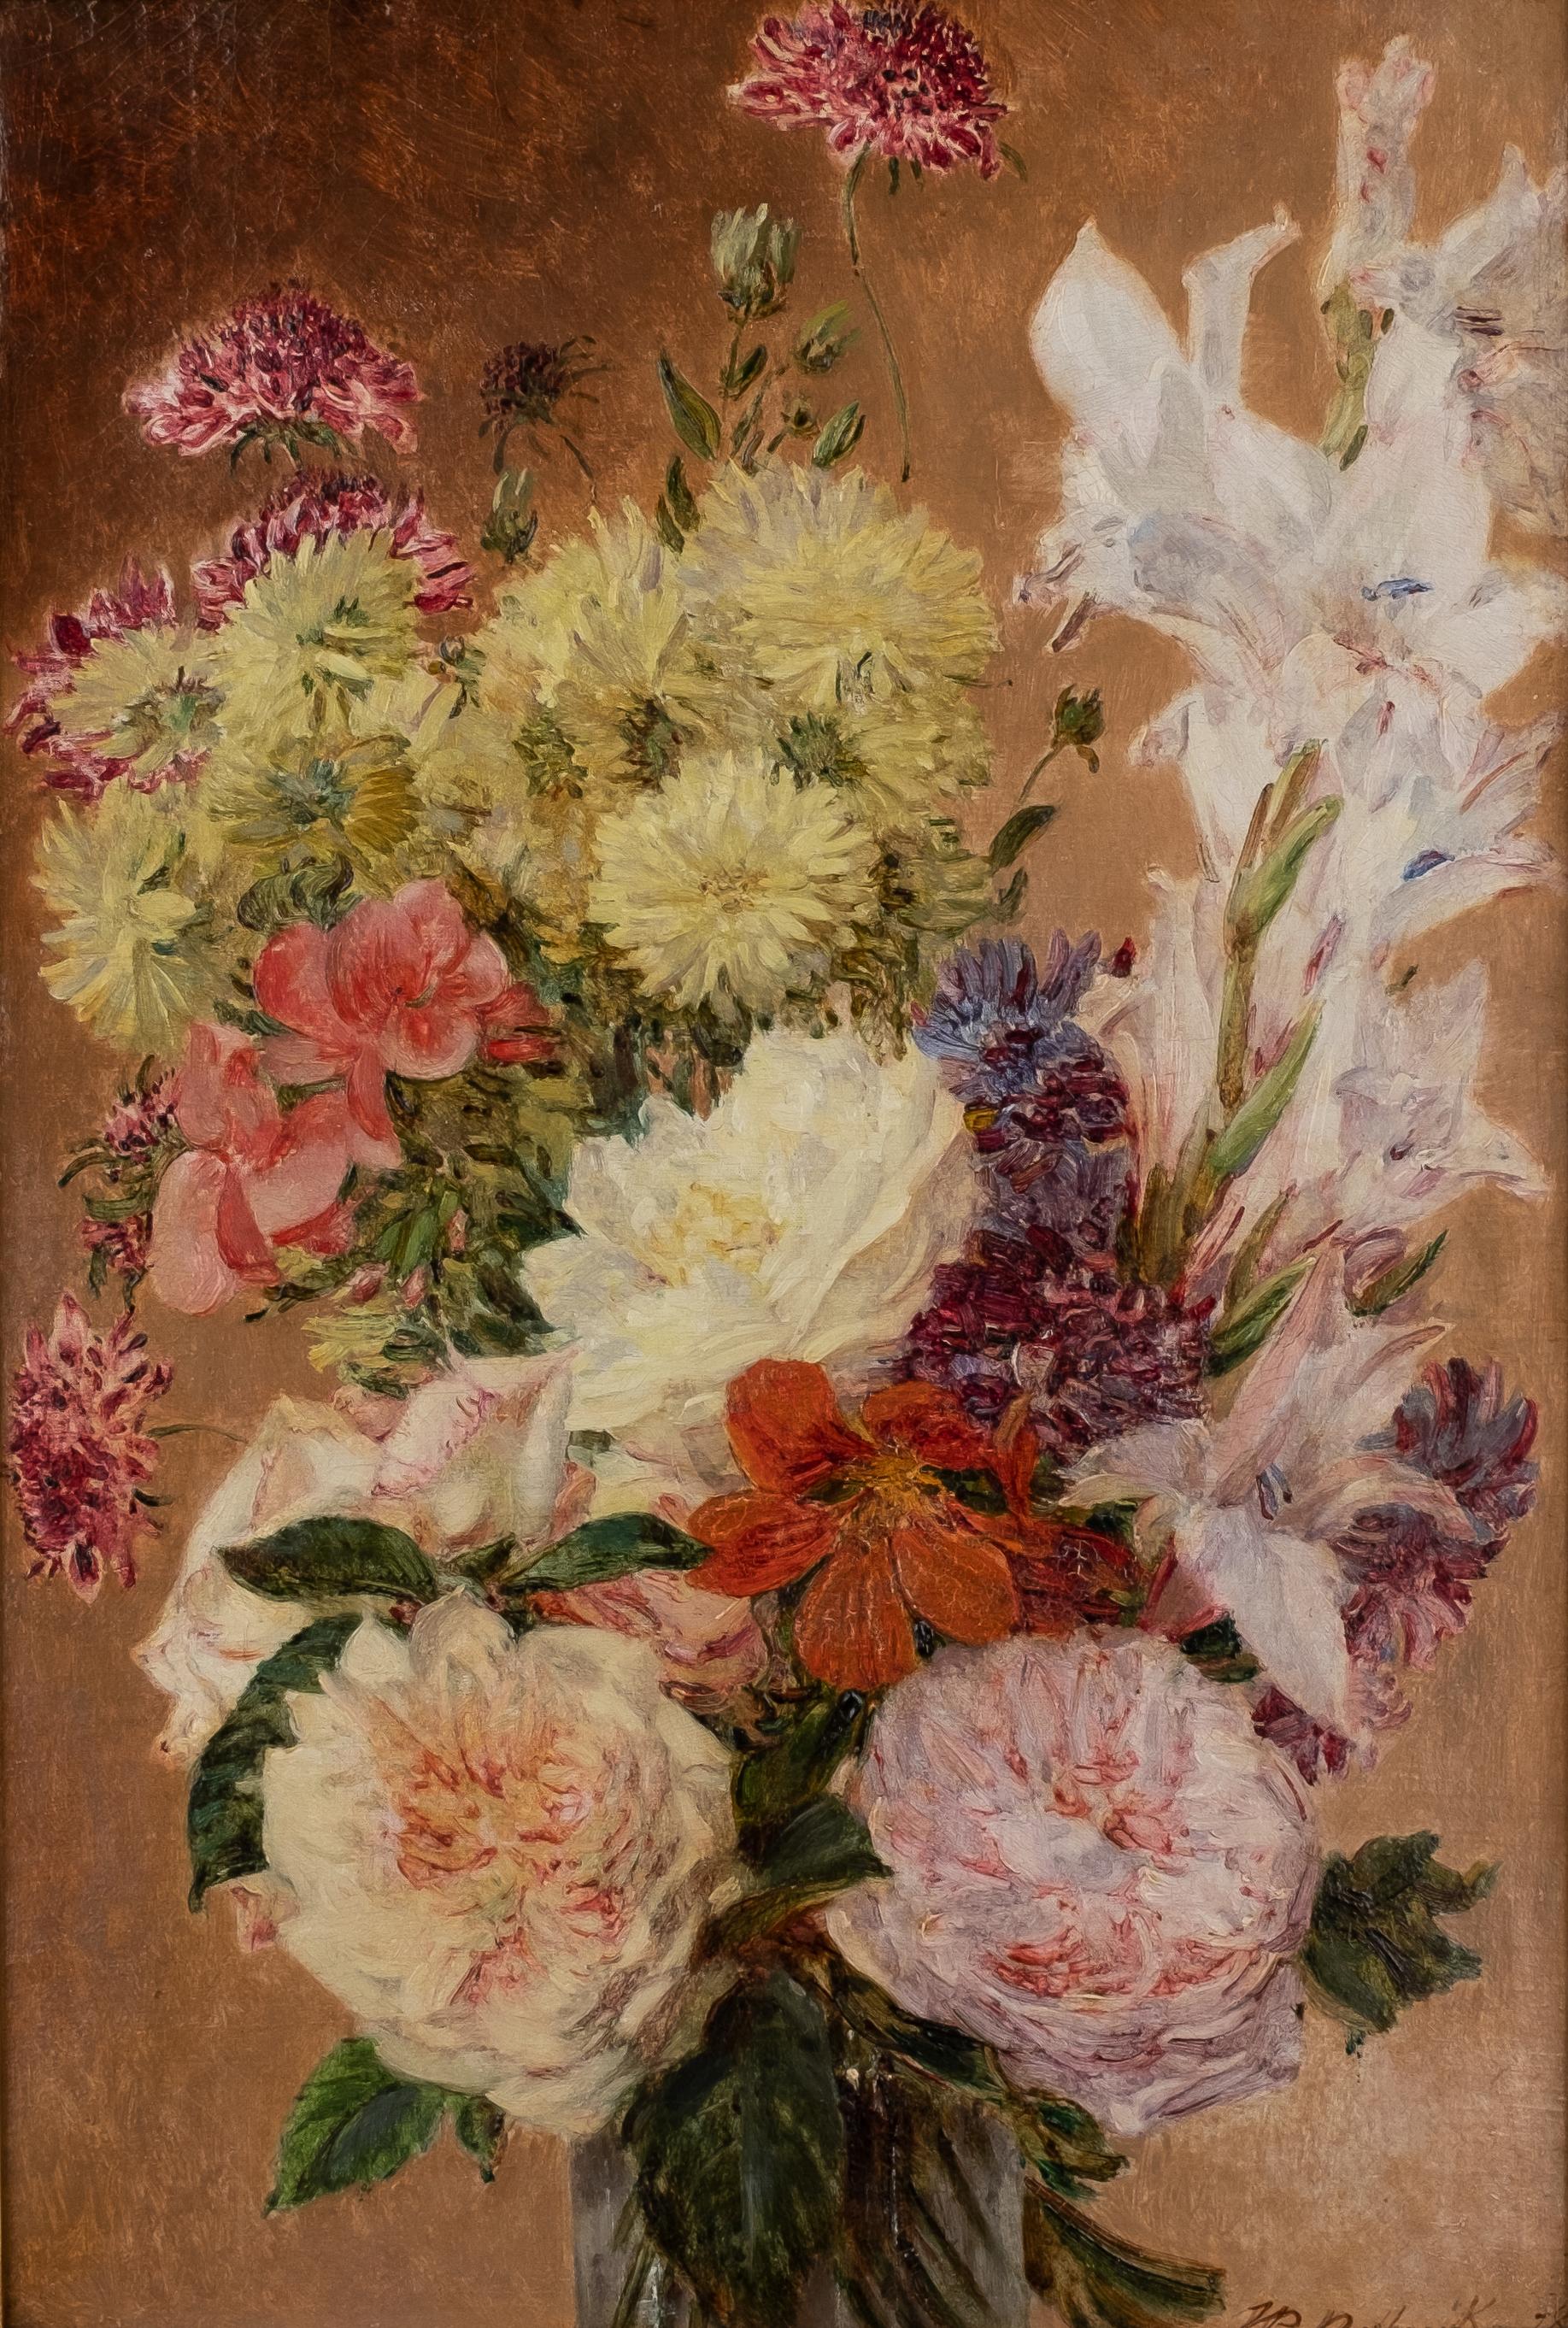 The Bouquet, french flowers still life - Painting by William Perkins Babcock